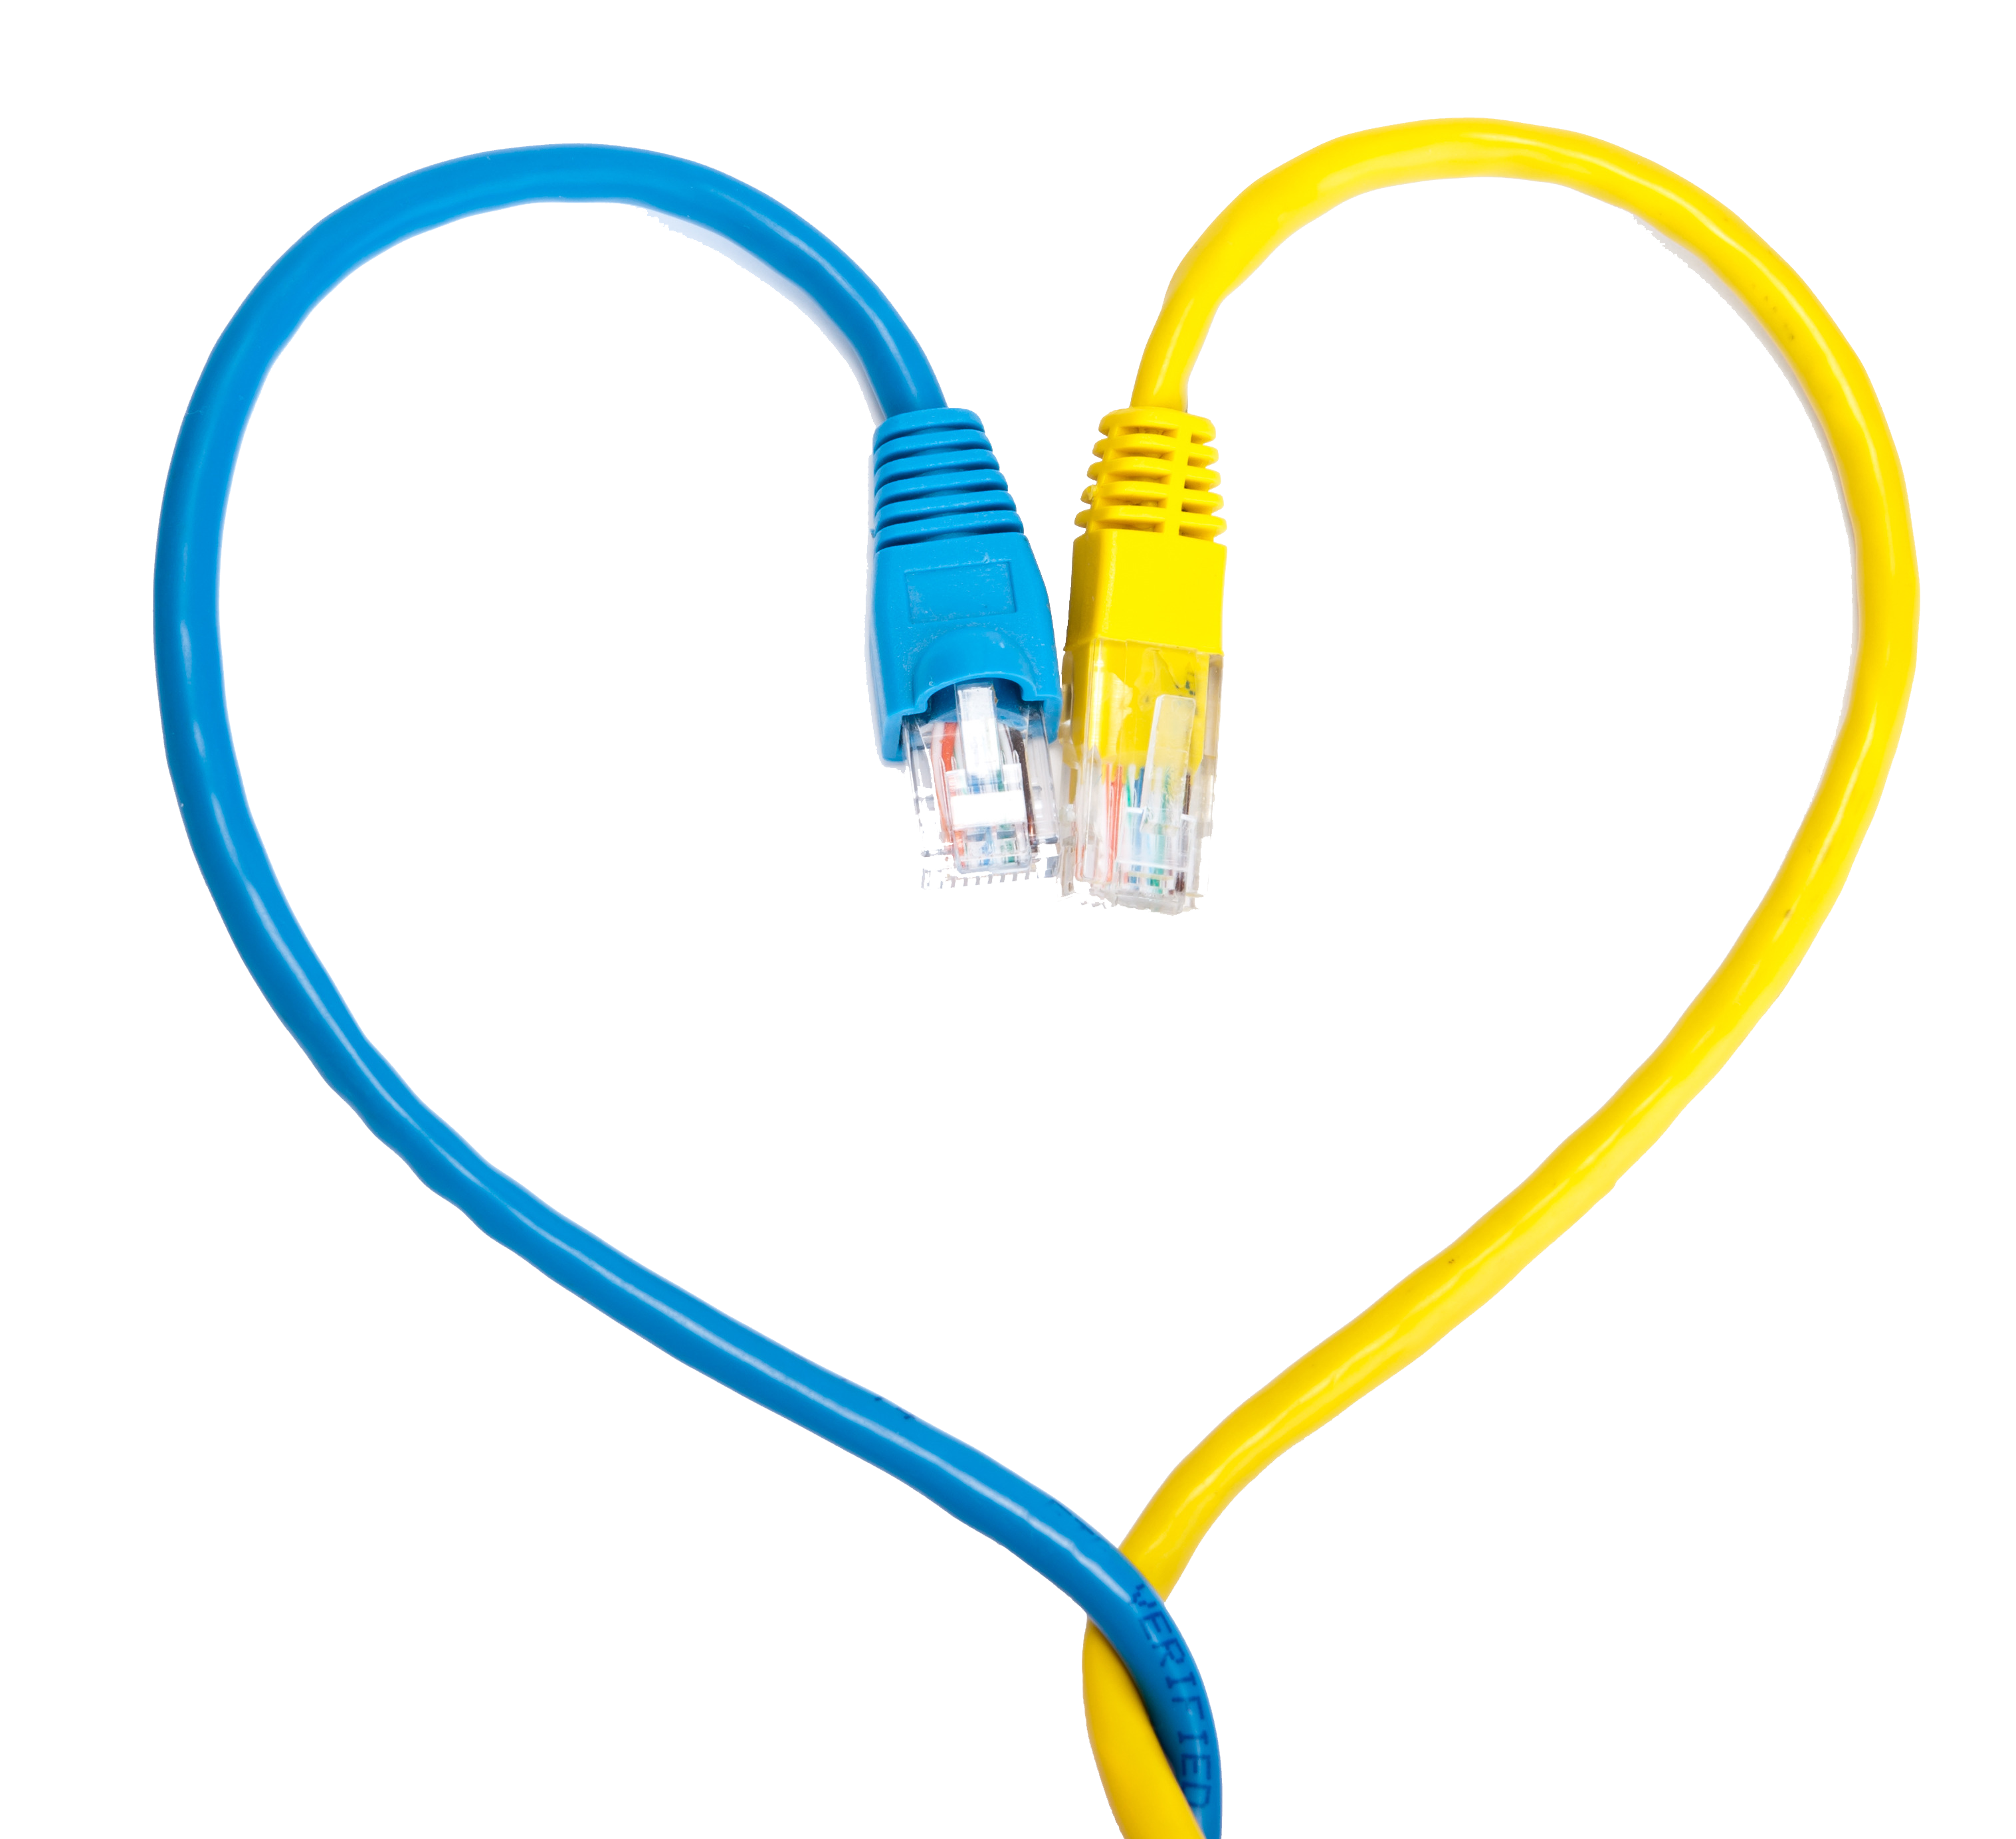 Cable Heart Graphic